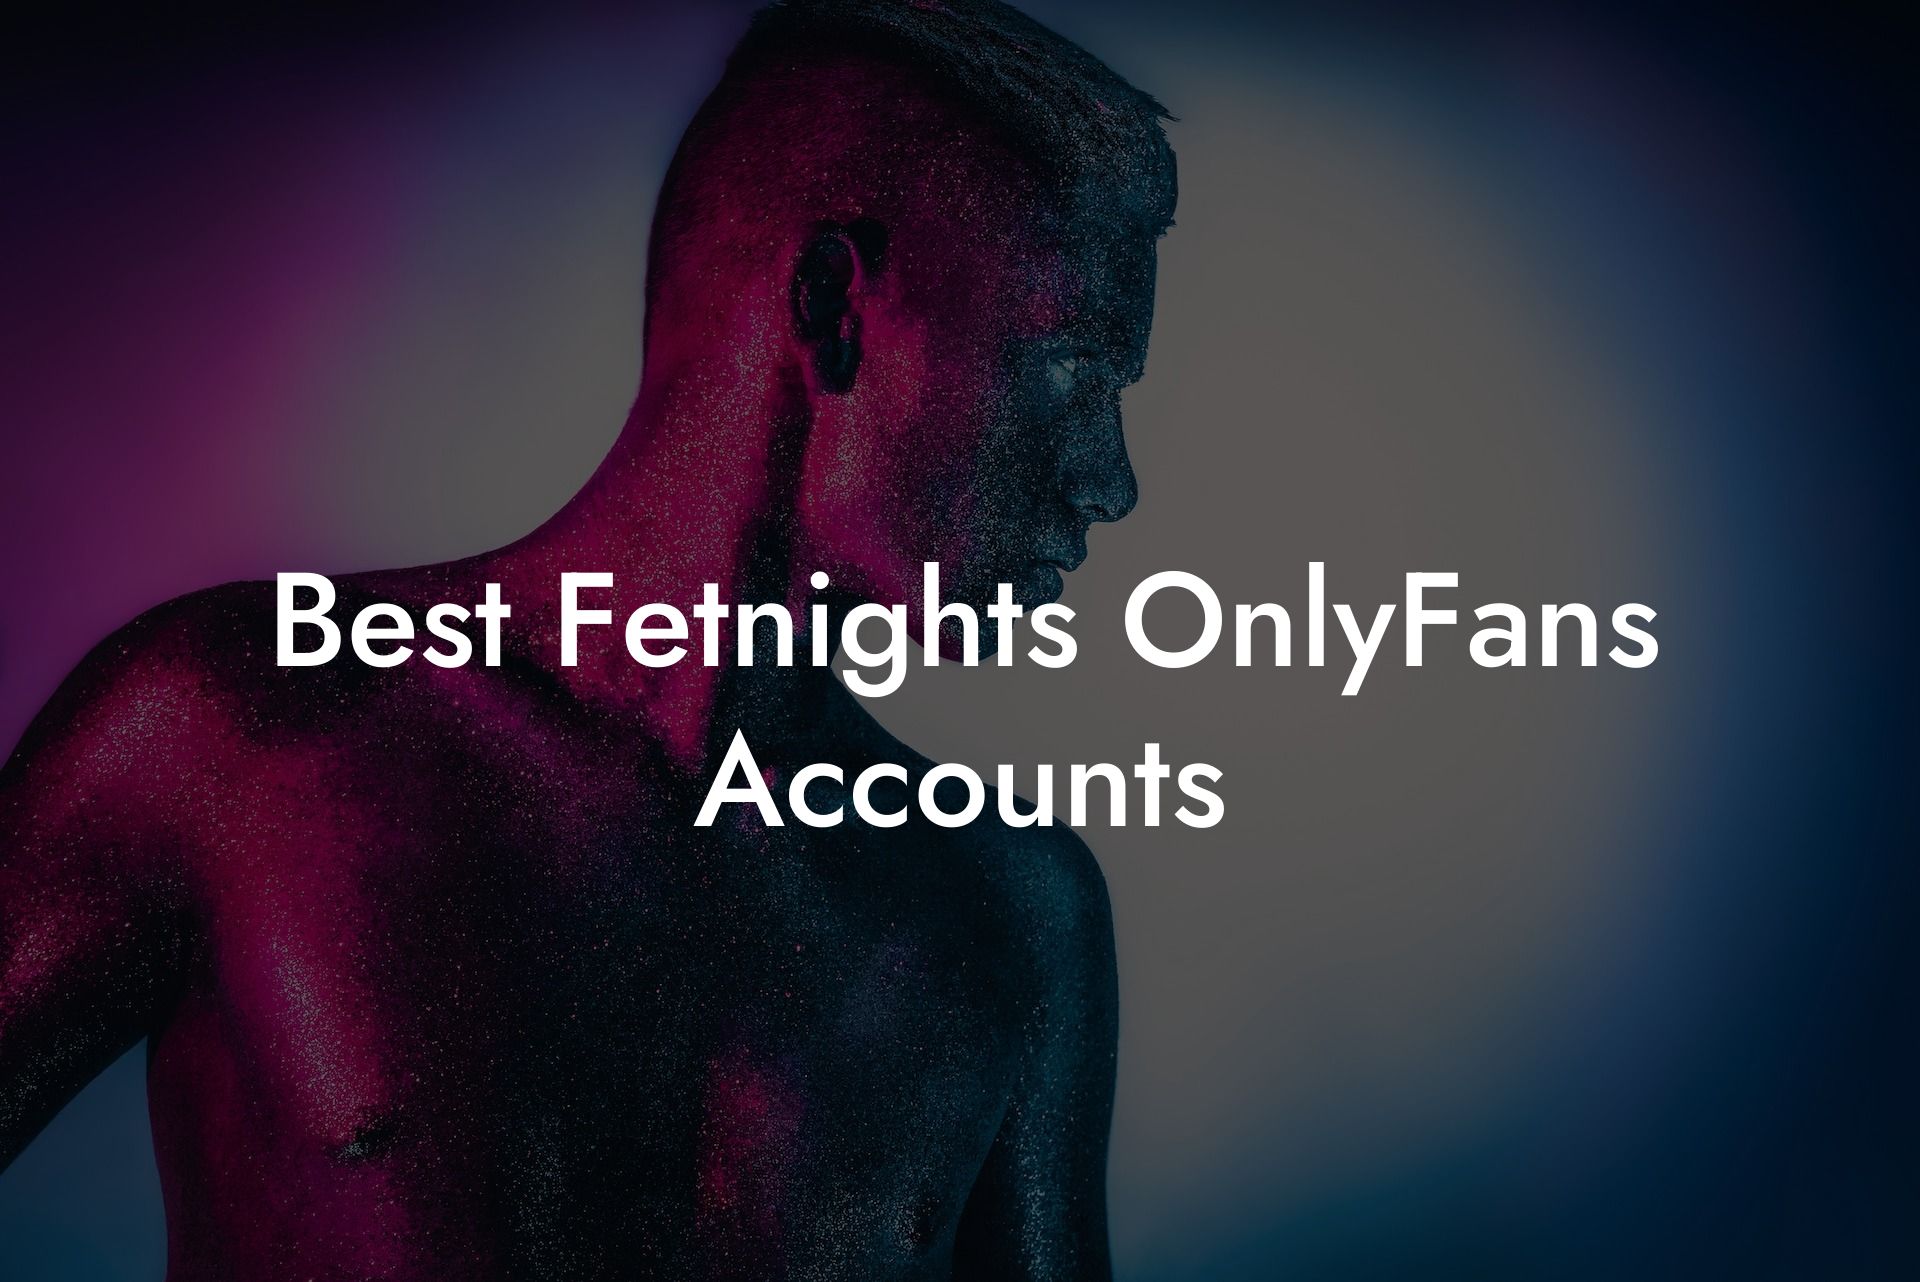 Best Fetnights OnlyFans Accounts